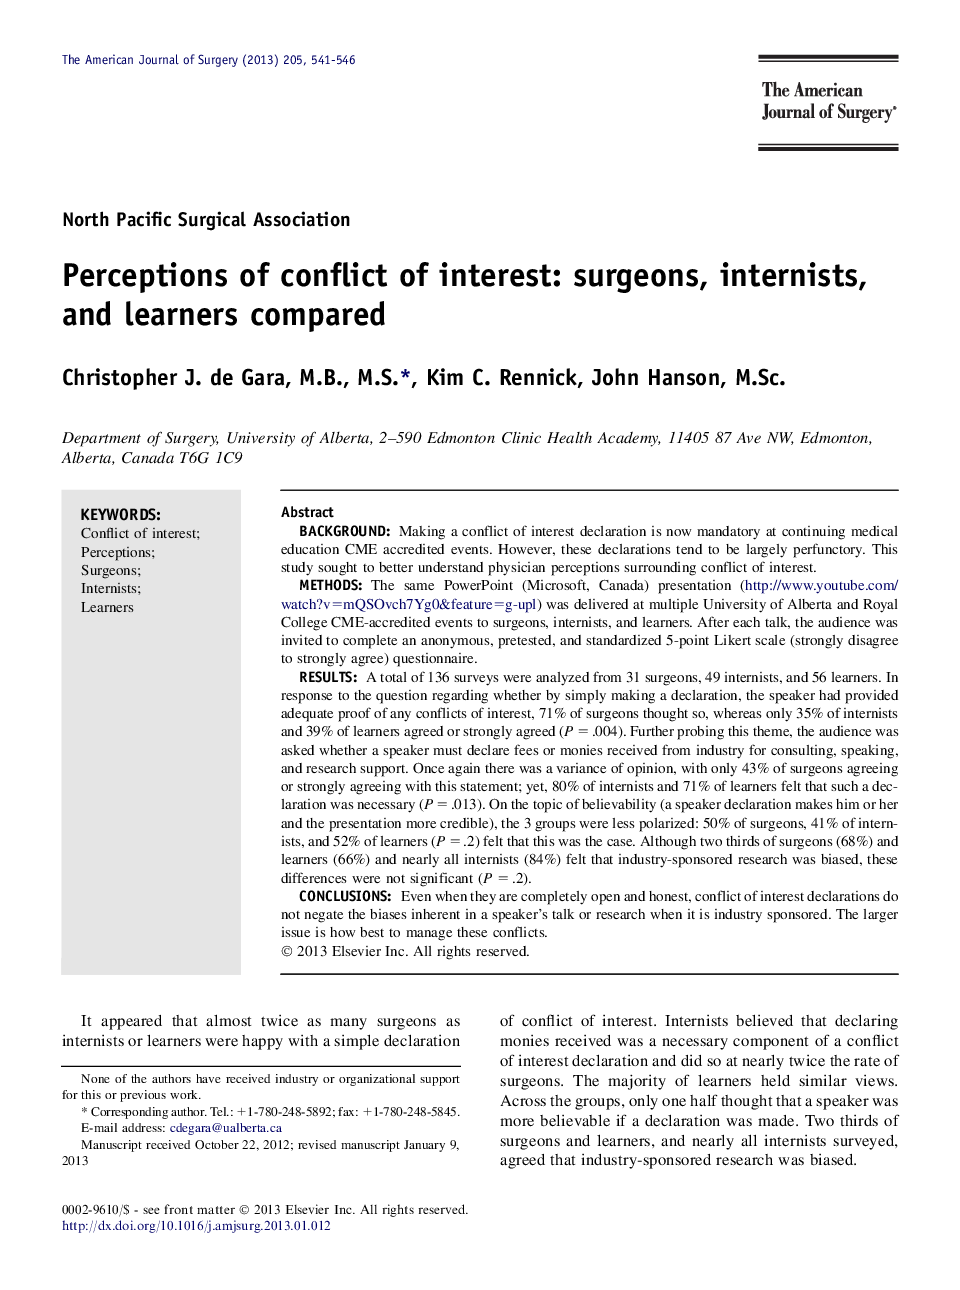 Perceptions of conflict of interest: surgeons, internists, and learners compared 